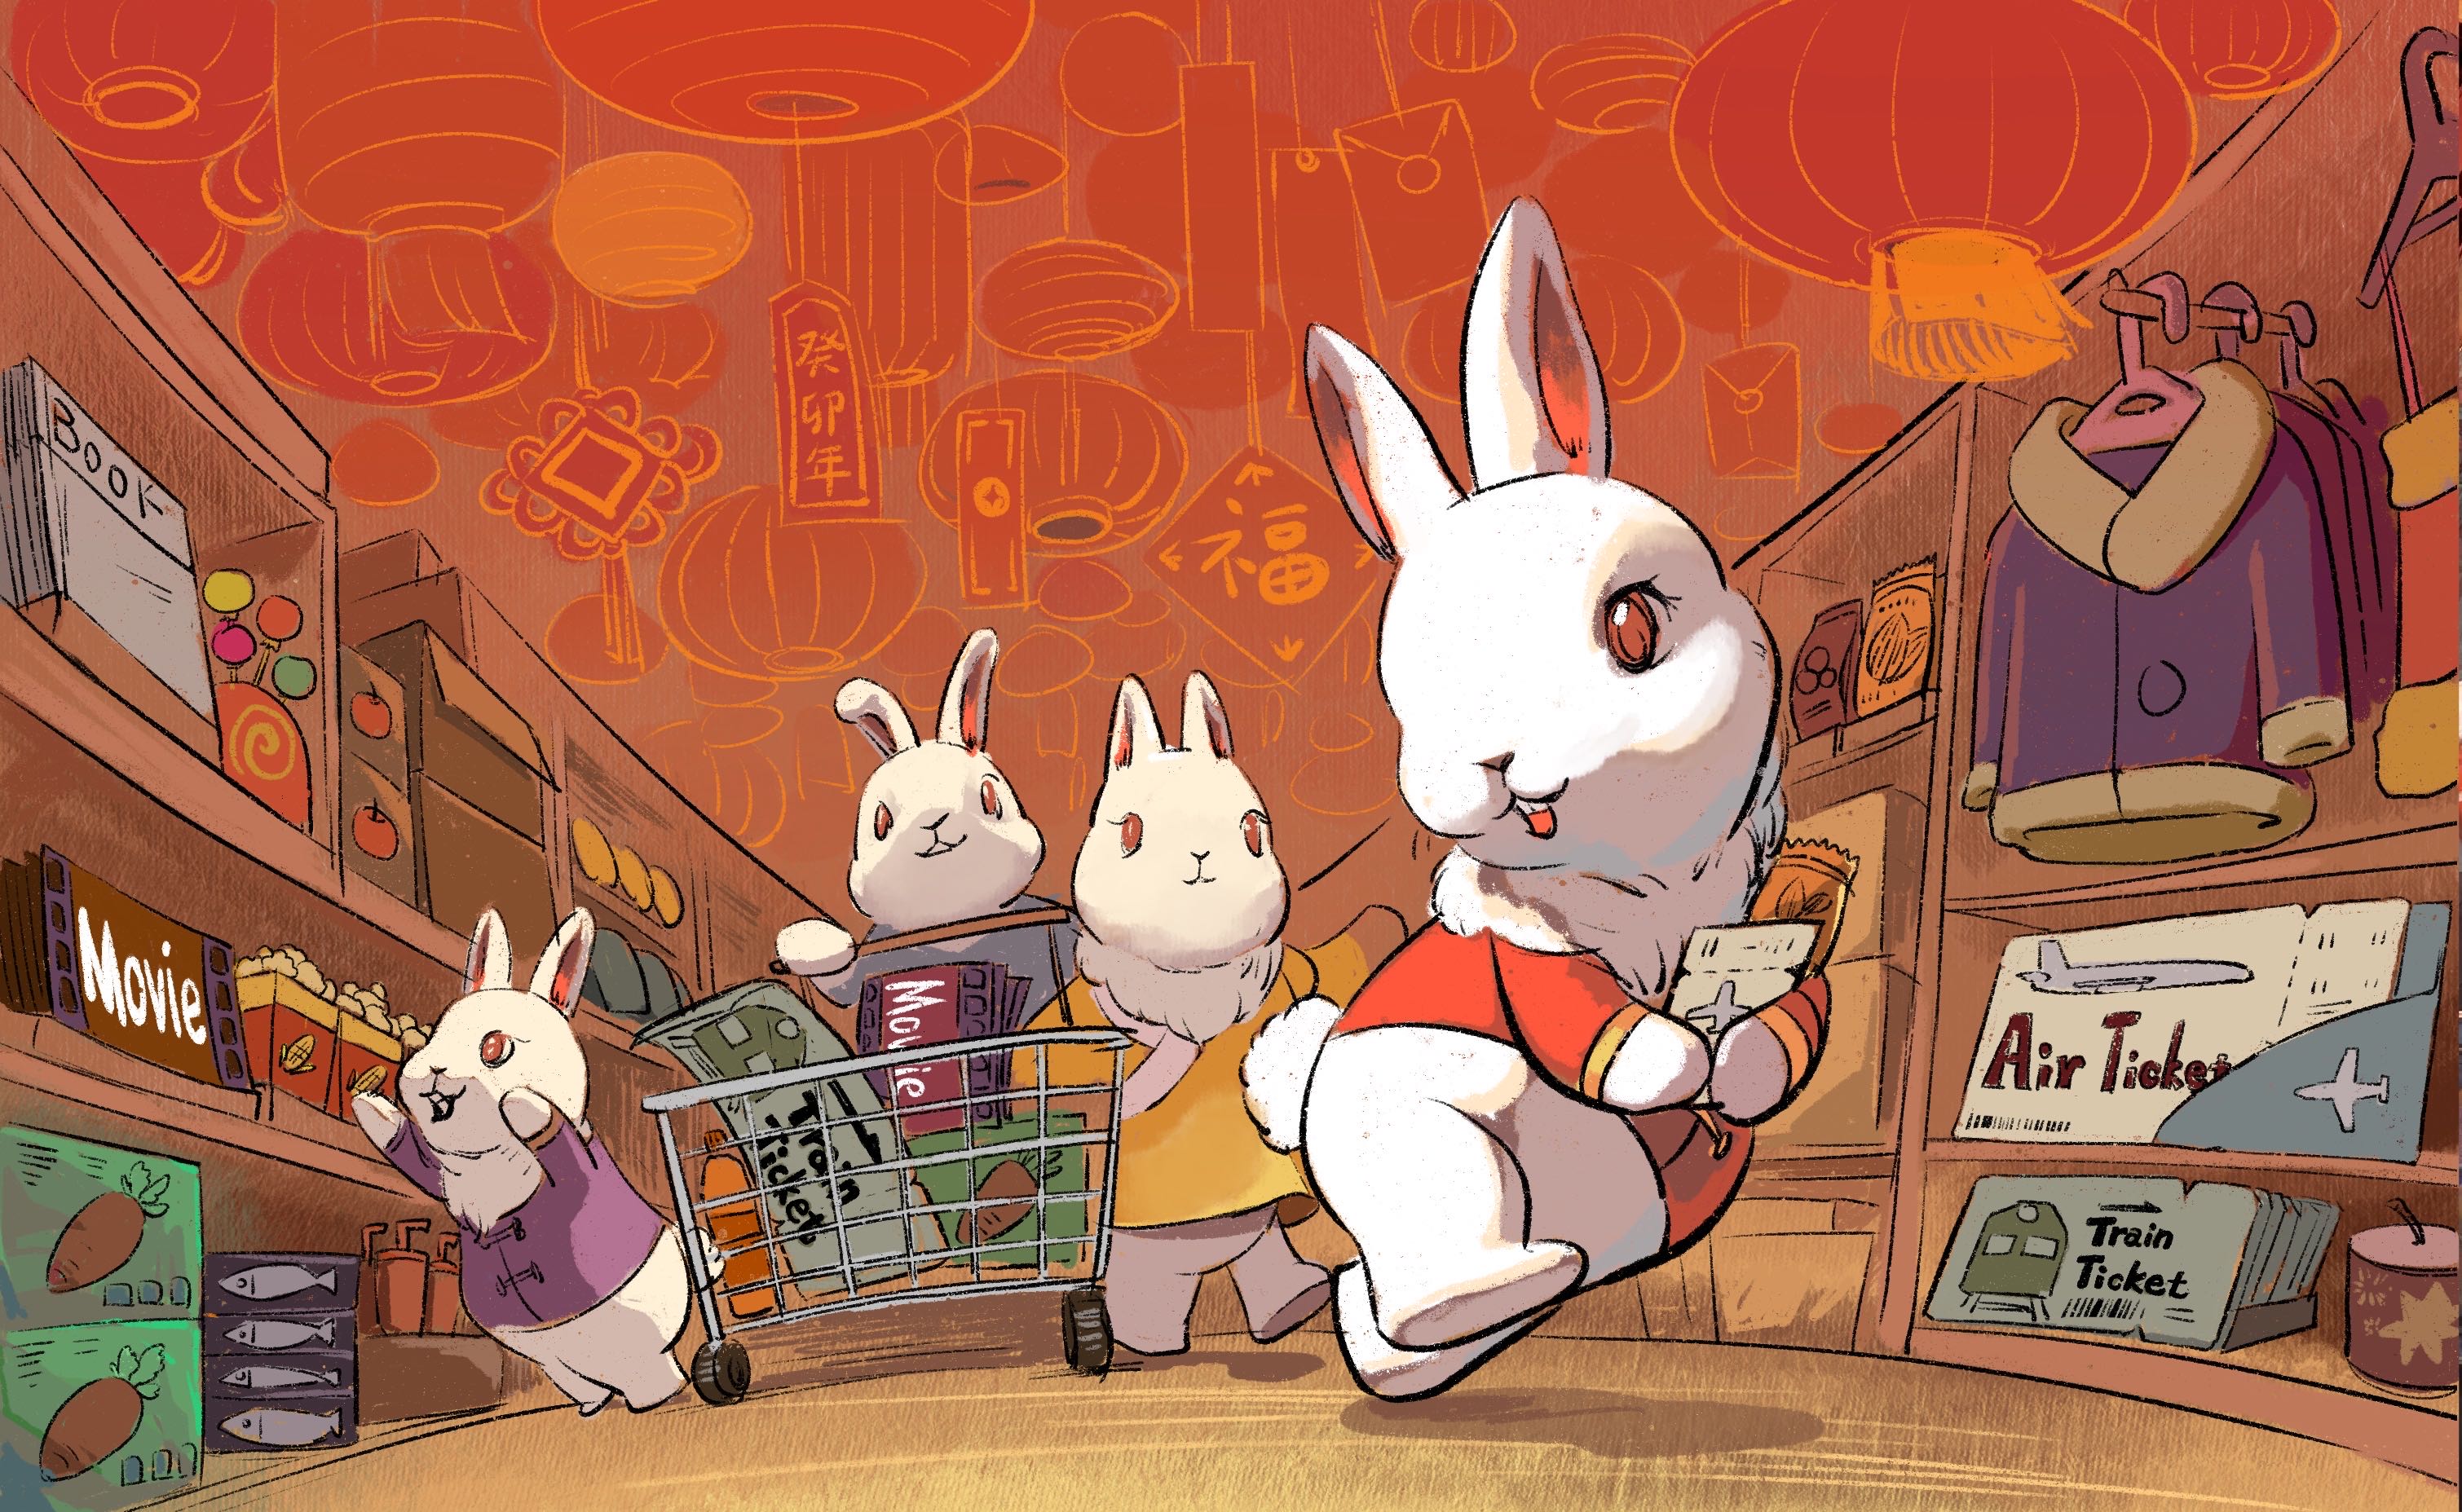 Year of the Rabbit shopping carts are overflowing!